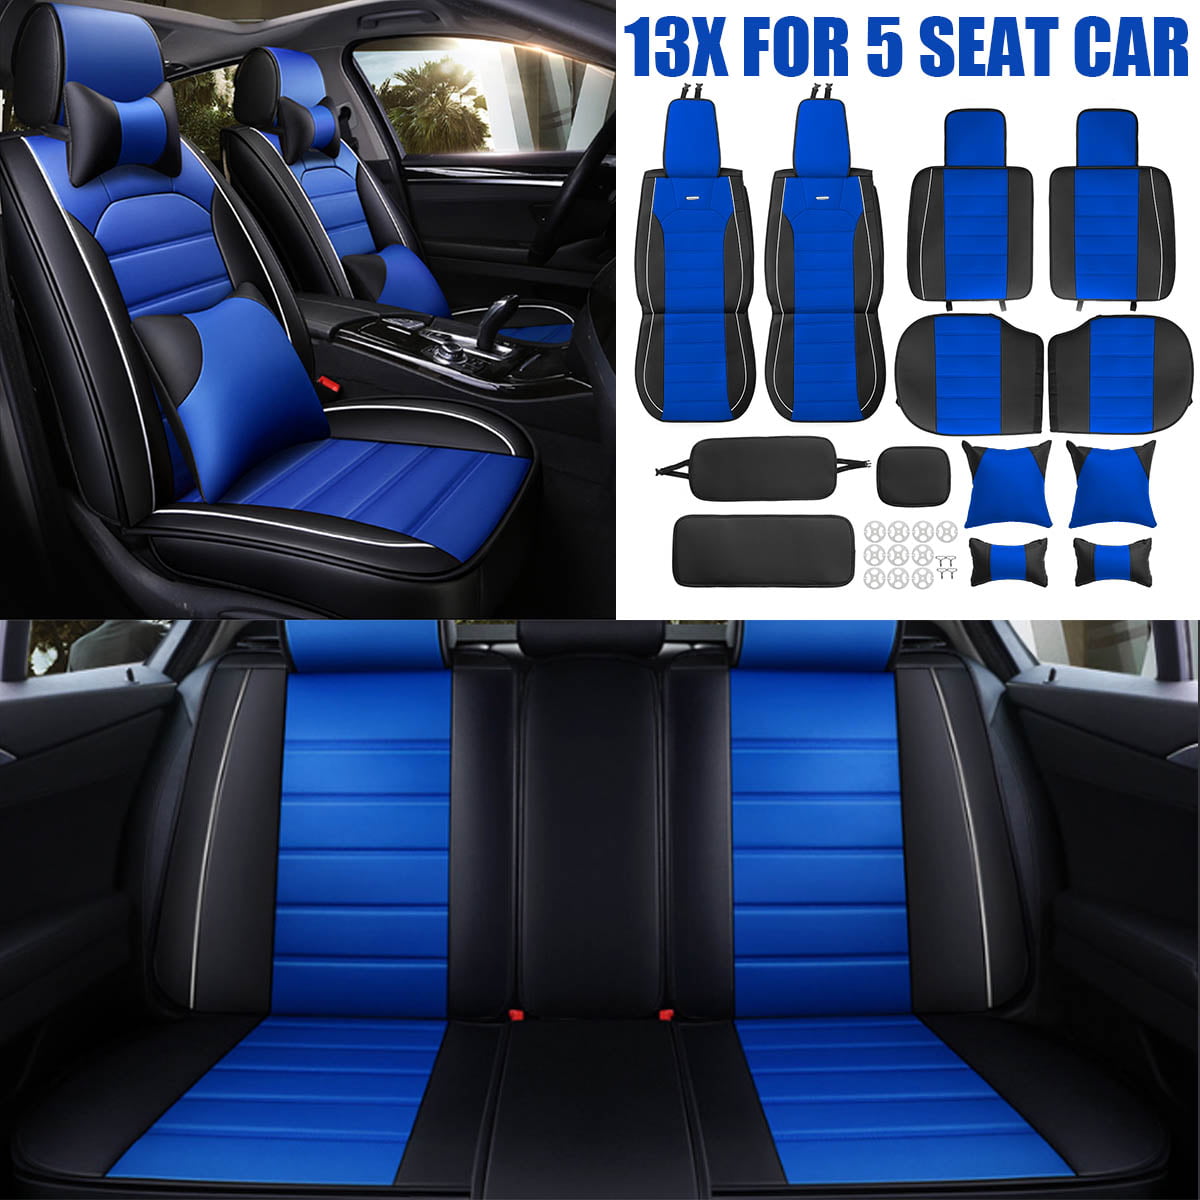 Front Rear 5 Seat Full Set Universal Leather Seasons Protectors Pad Compatible Airbag with Pillow. DAPENG Car Seat Cover Color : Blue 